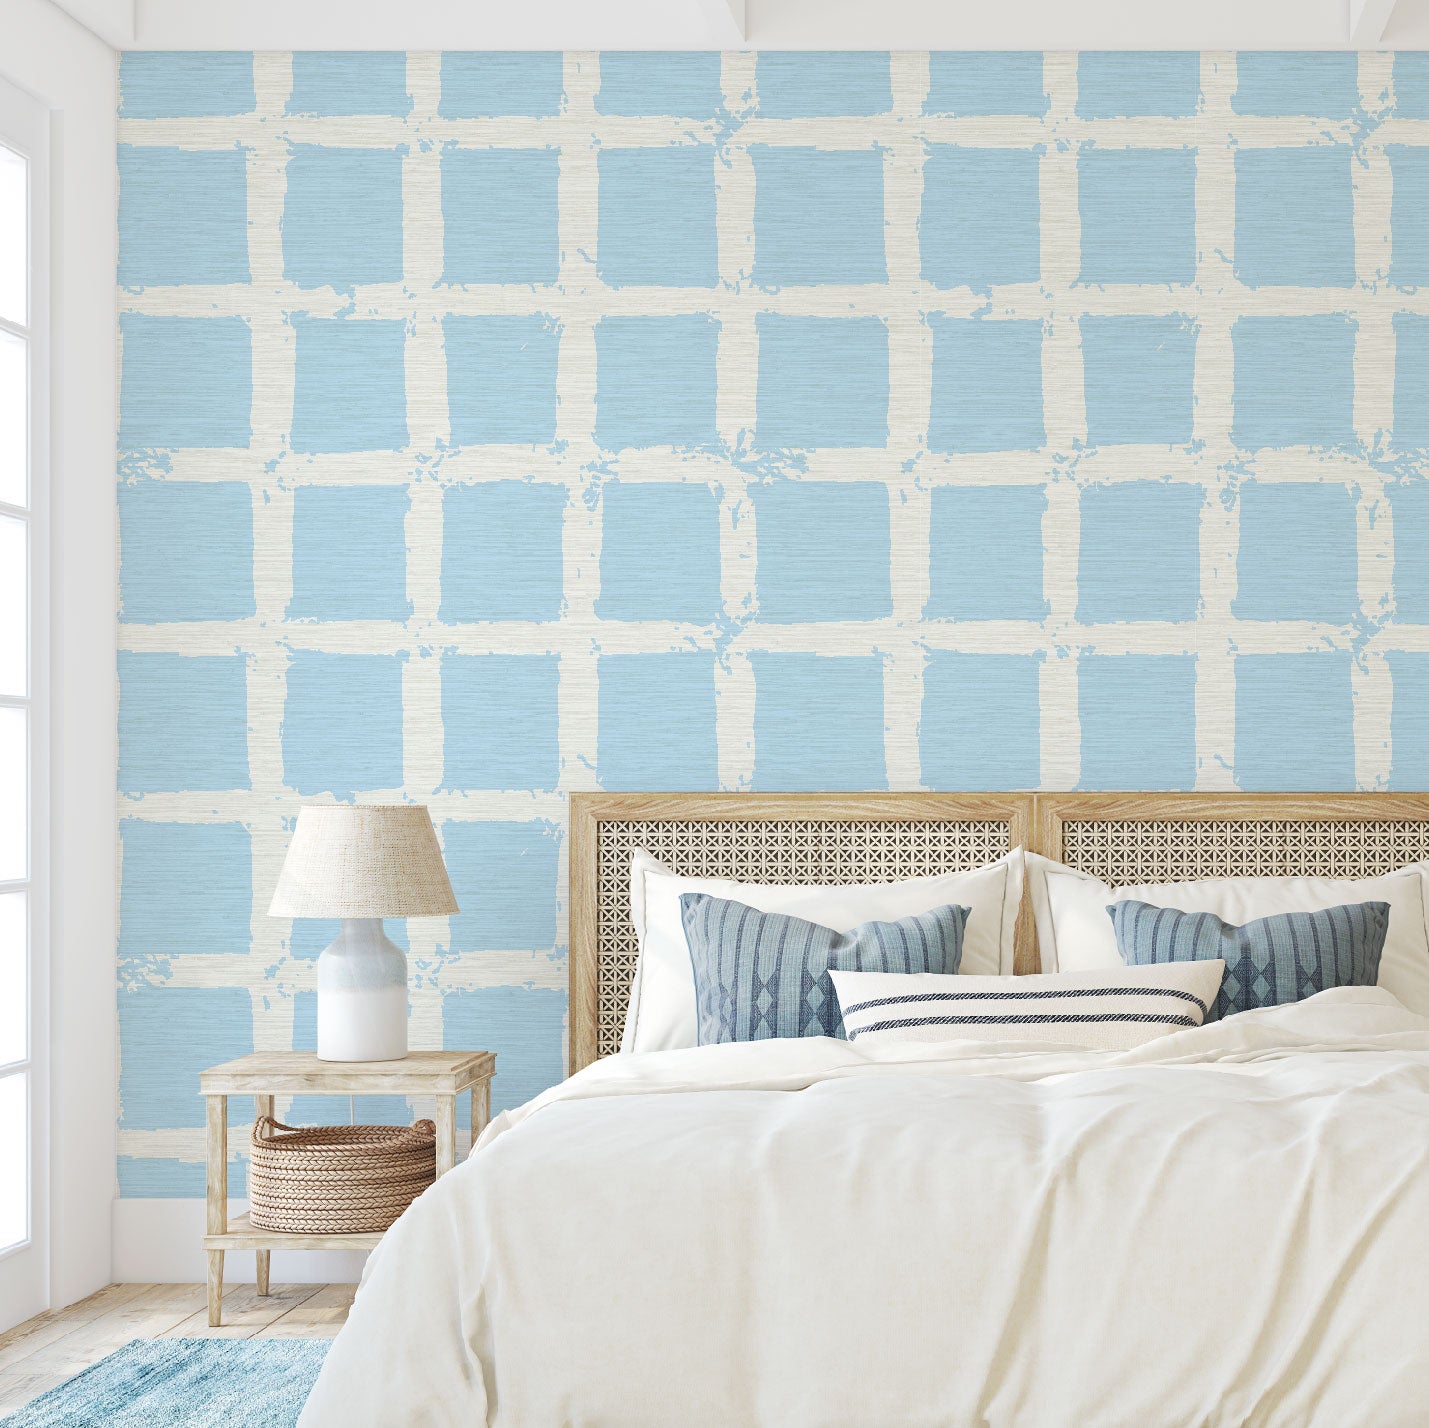 Bedroom with grasscloth wallpaper in hand painted square pattern emulating window panes in an oversized plaid layout with a french blue base on cream print